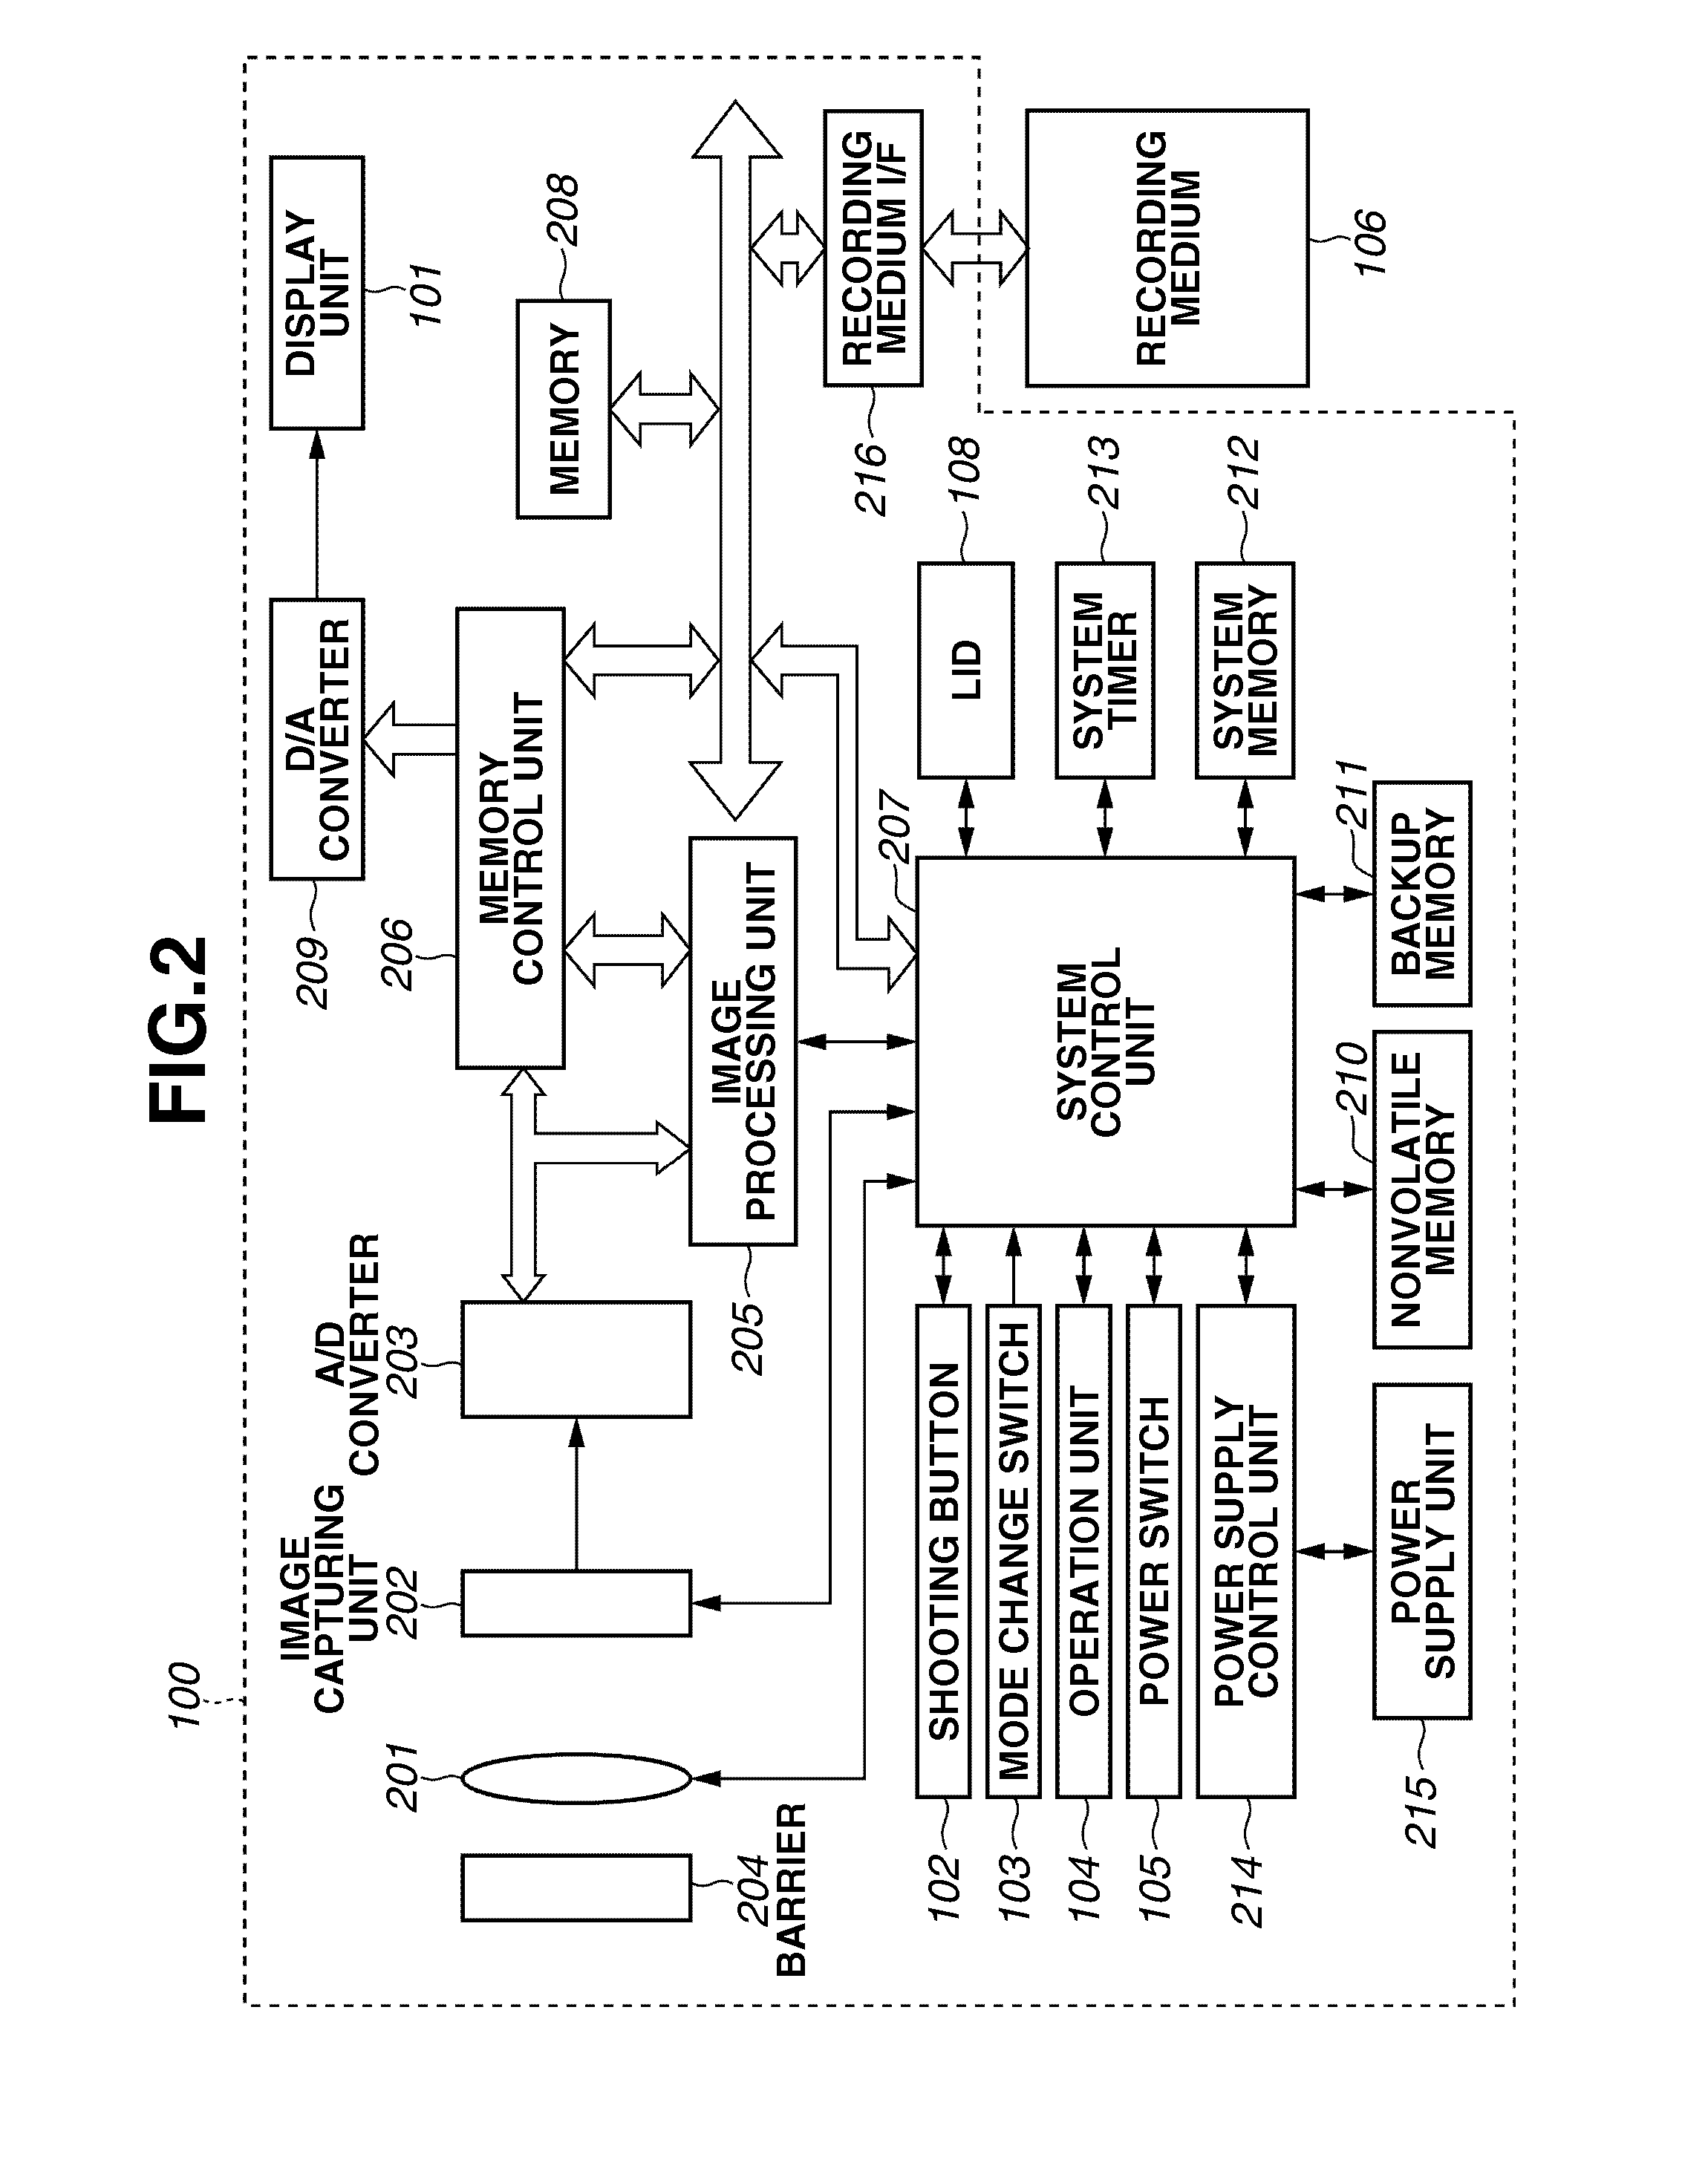 Display control apparatus and method for controlling display control apparatus